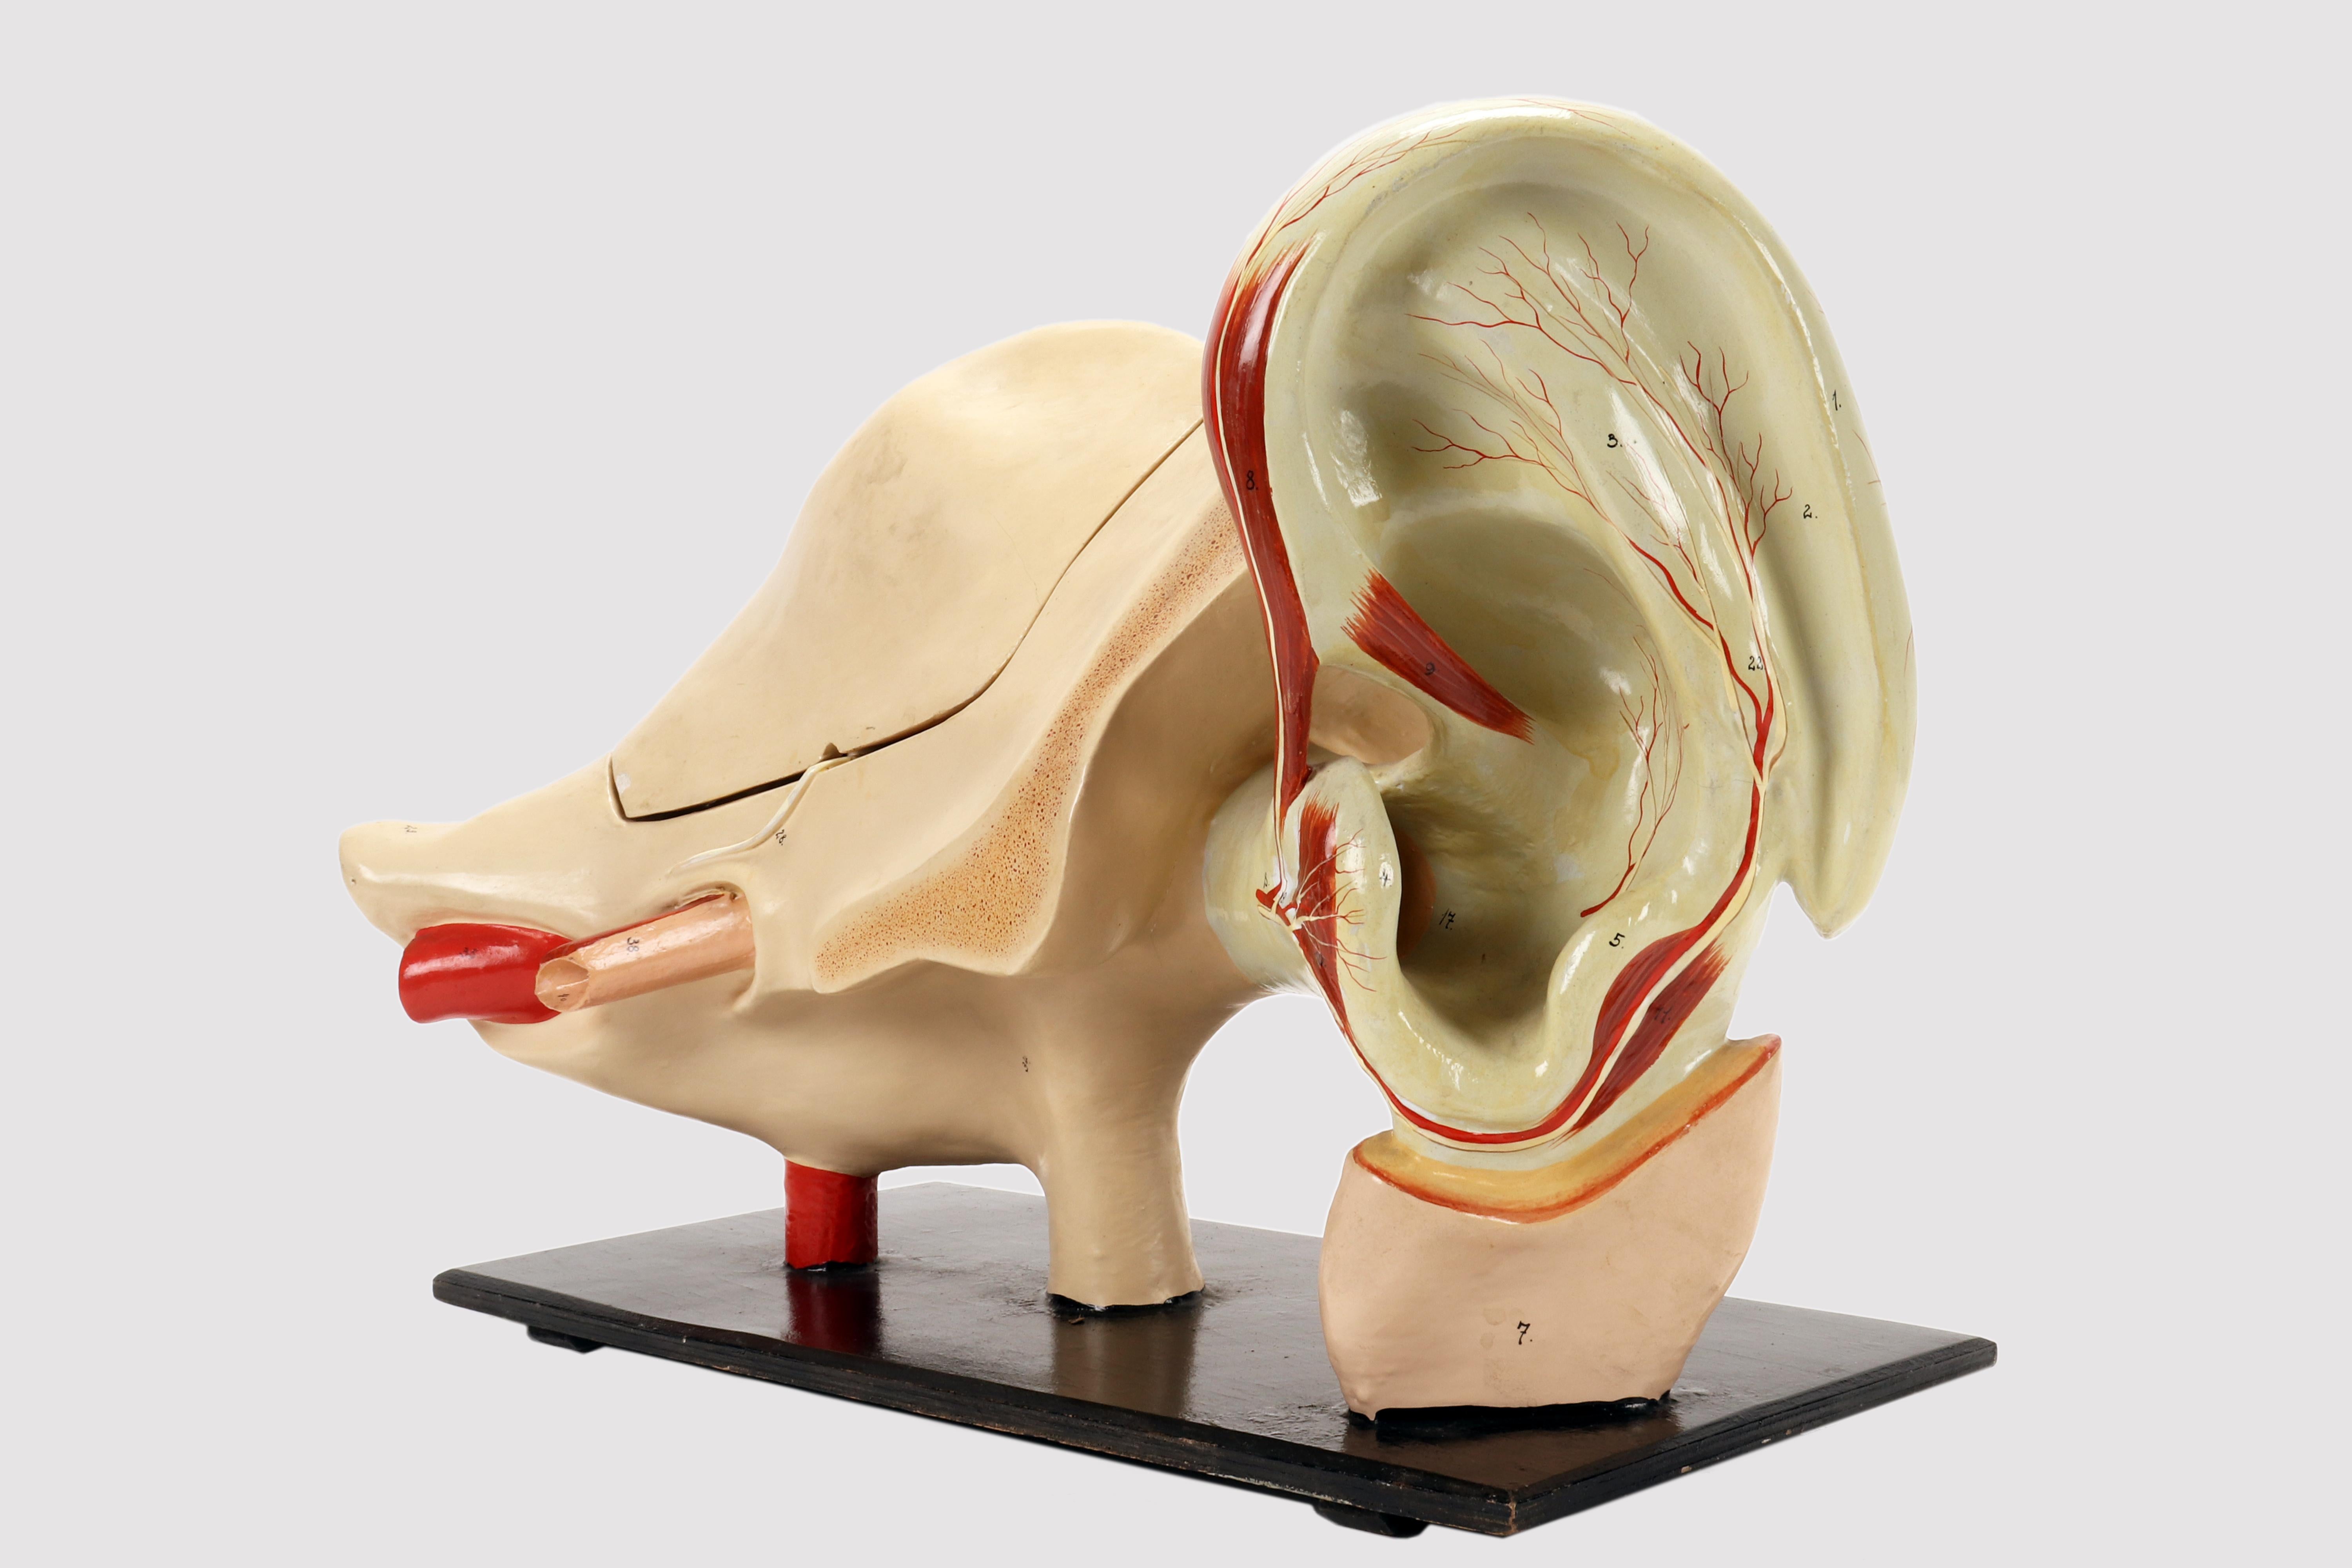 Rare anatomical model for schools, educational use, depicting a separable external and internal ear, complete in all its parts, made of plaster and painted paper mache, metal hooks. All placed on a black painted wooden base. Italy circa 1890.